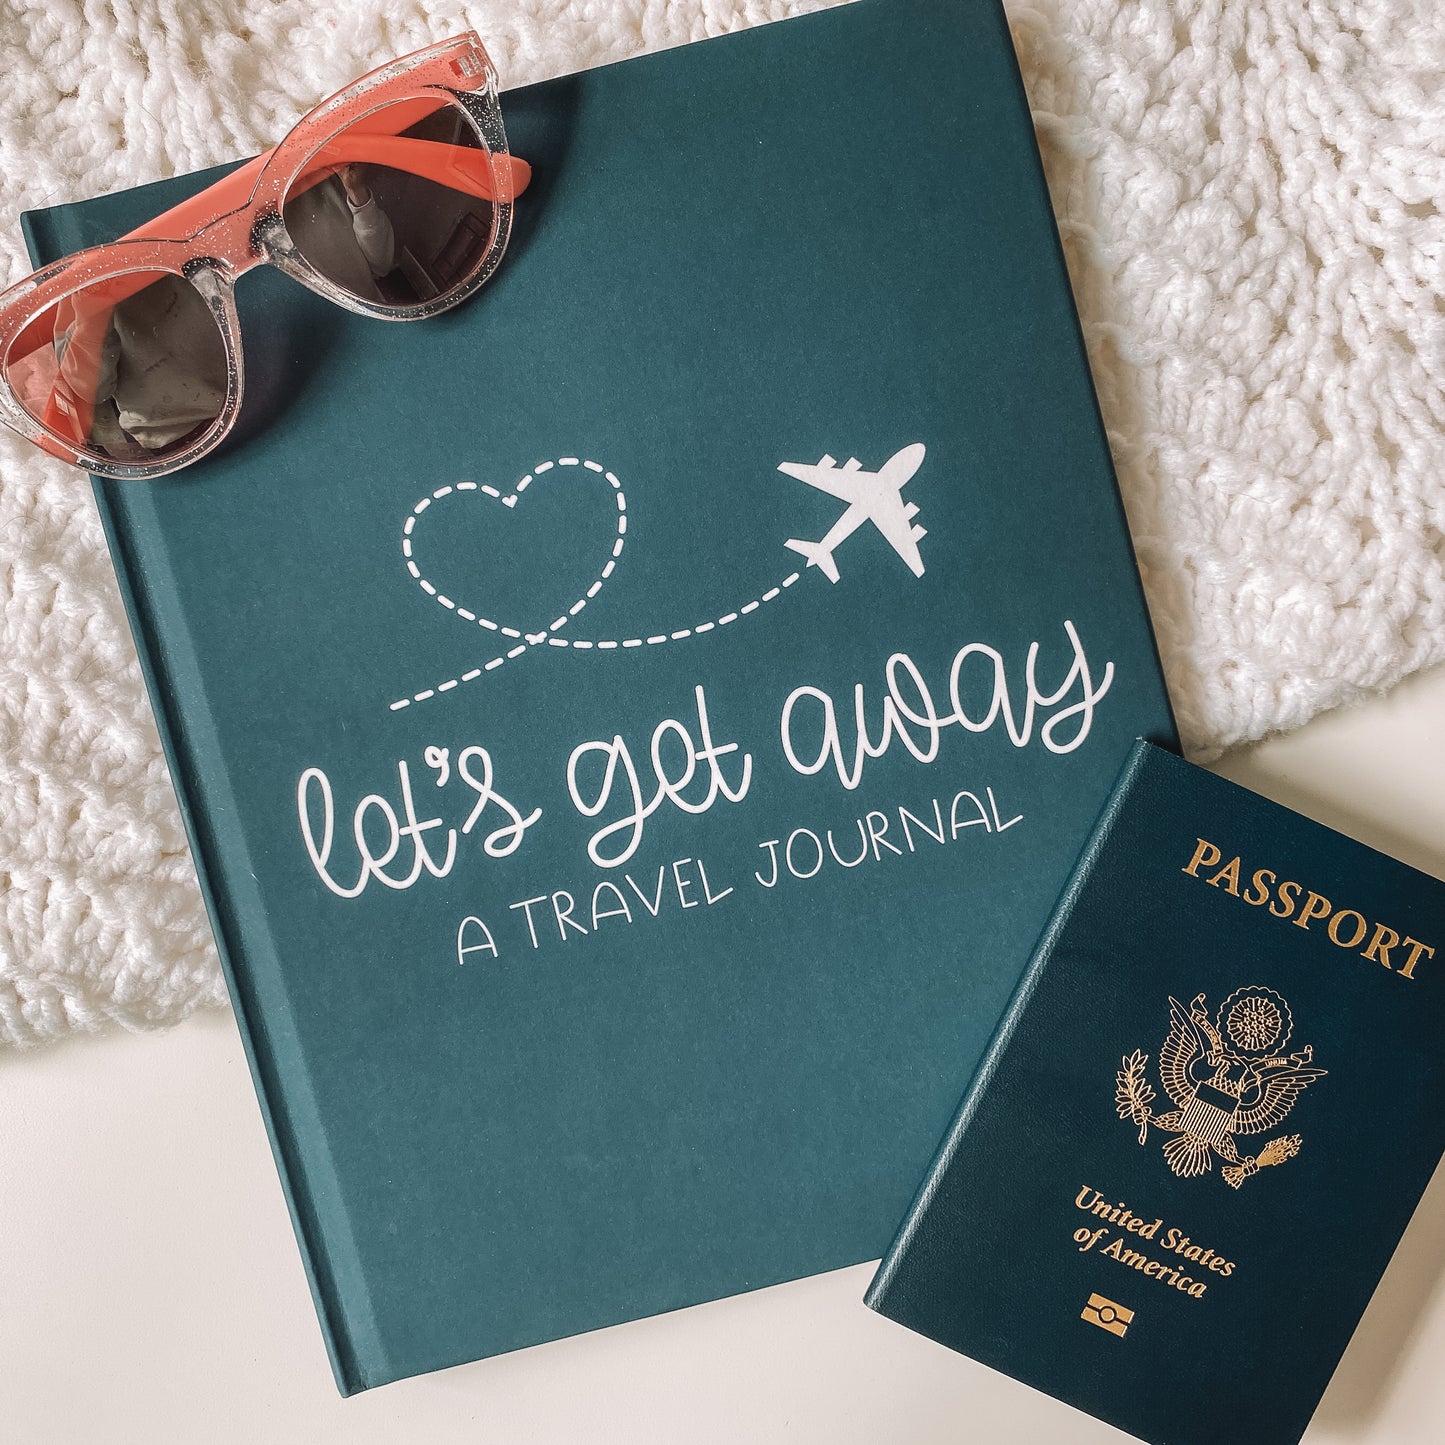 Keepsake travel journal with a soft, matte blue hardcover. White text reads Lets Get Away A Travel Journal with a graphic of a white airplane leaving a heart trail behind it.